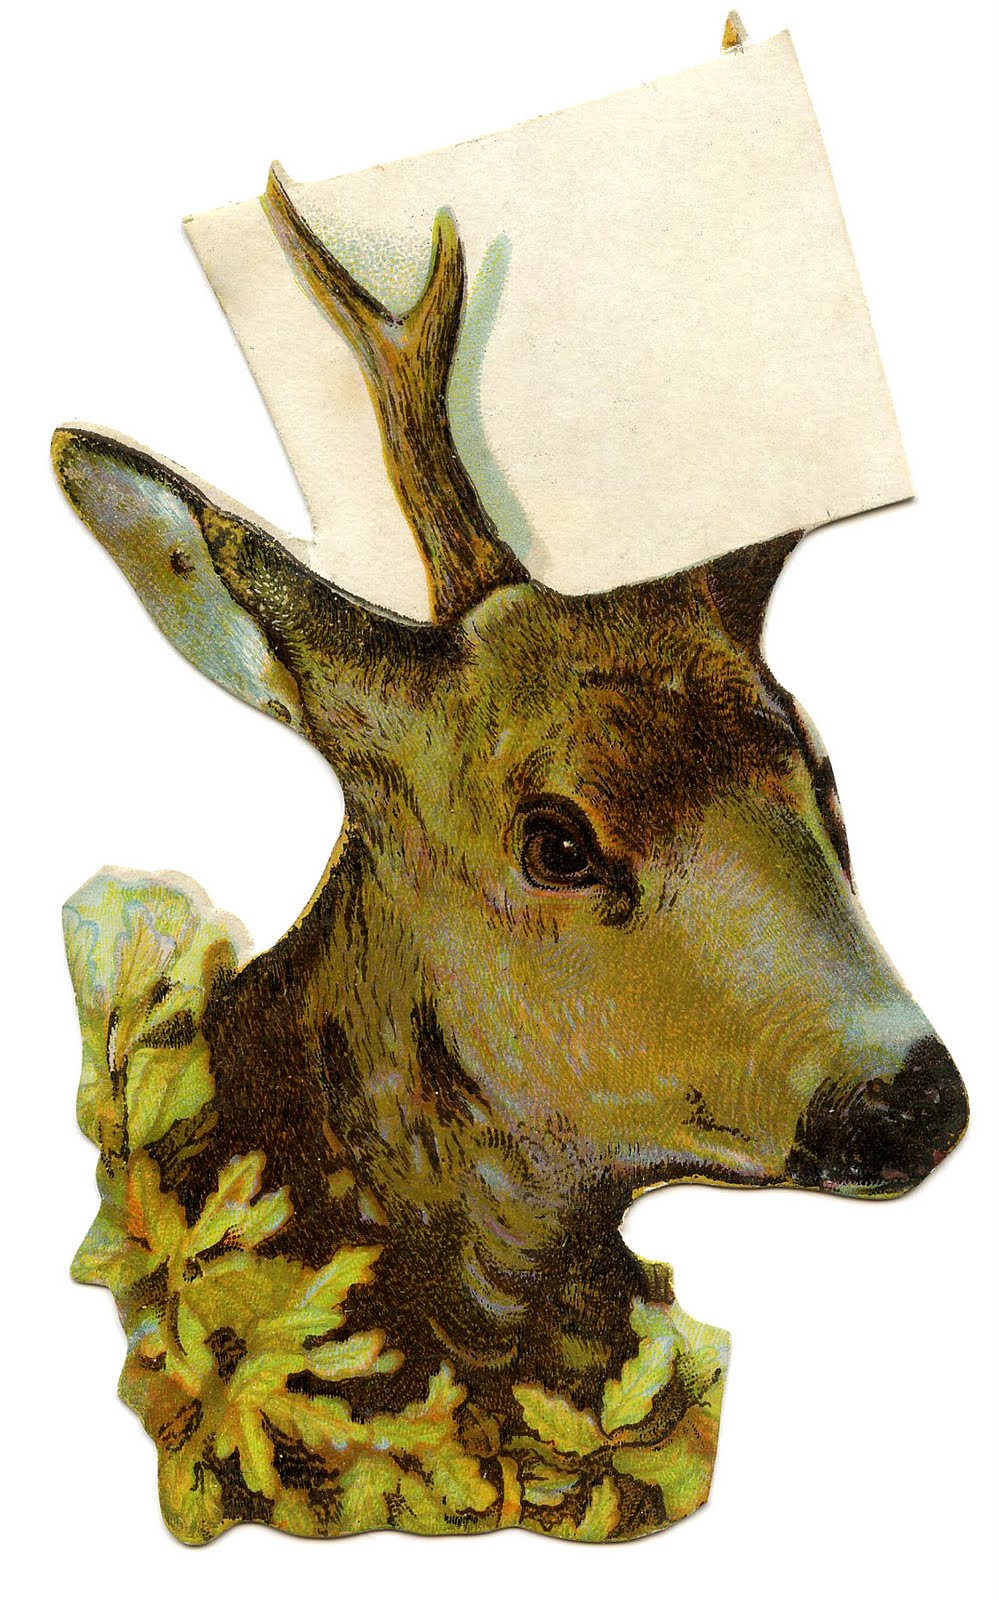 Vintage Christmas Clip Art - Deer Head with Sign - Place ...